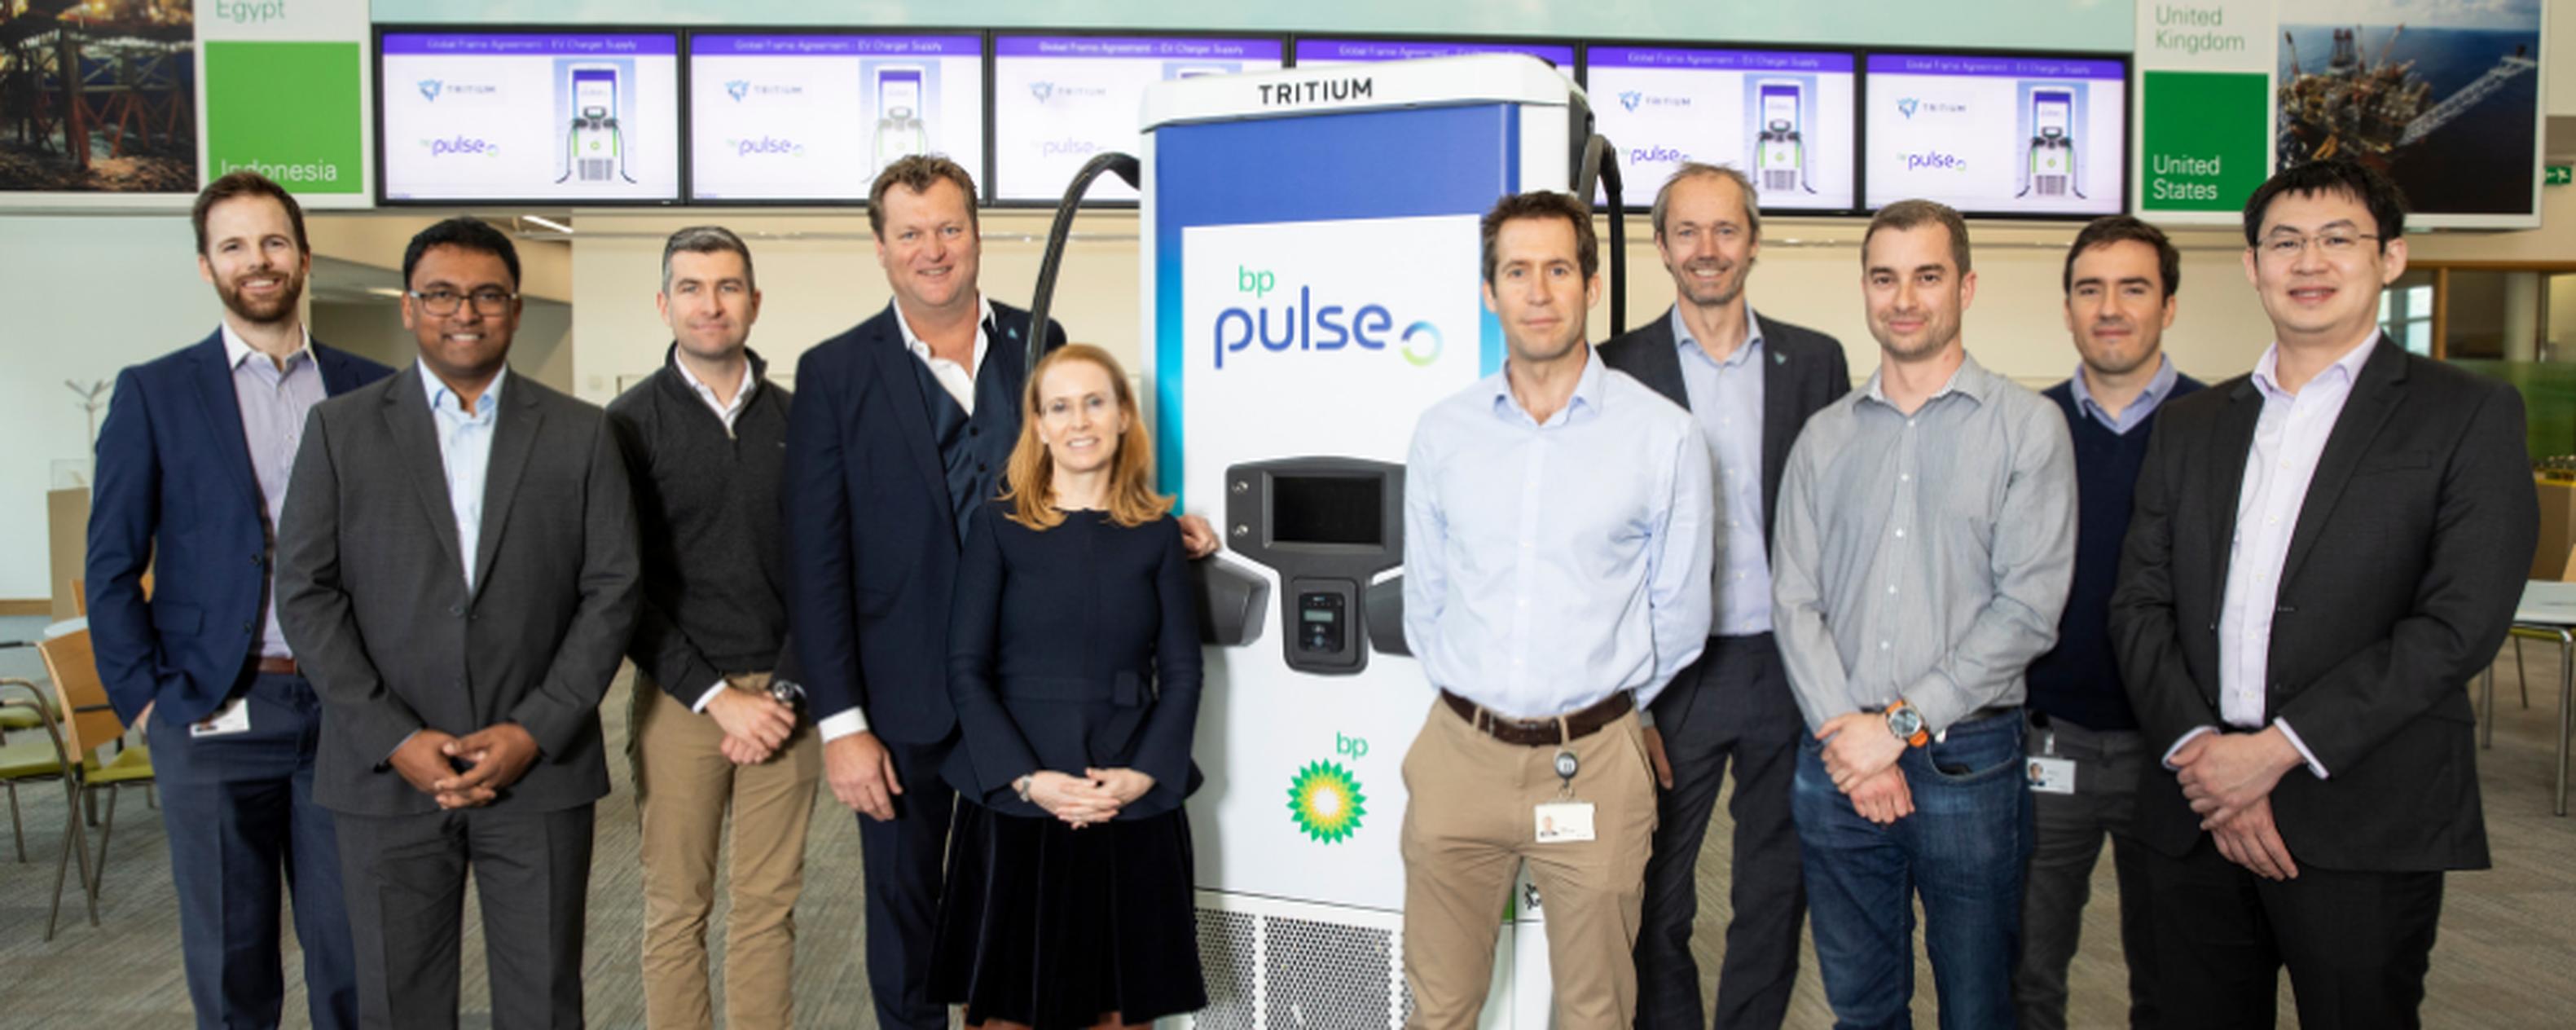 BP to use Tritium chargers in UK, Australia and New Zealand